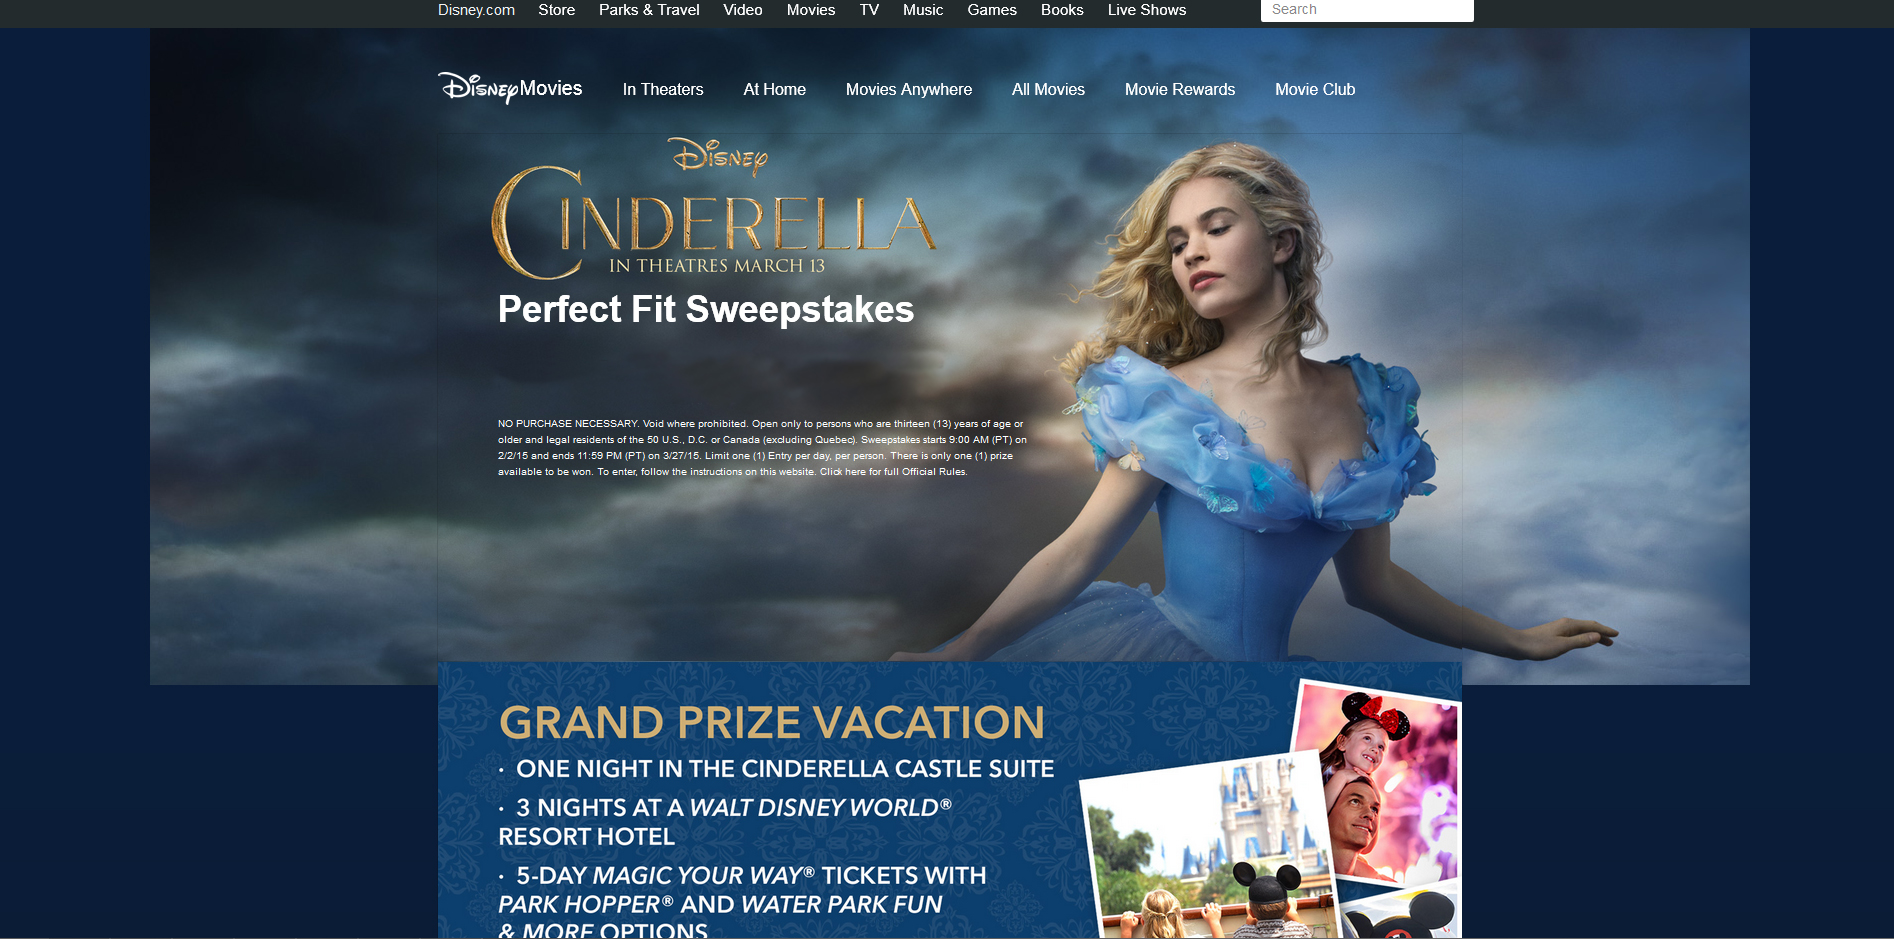 Disney's Cinderella Perfect Fit Sweepstakes